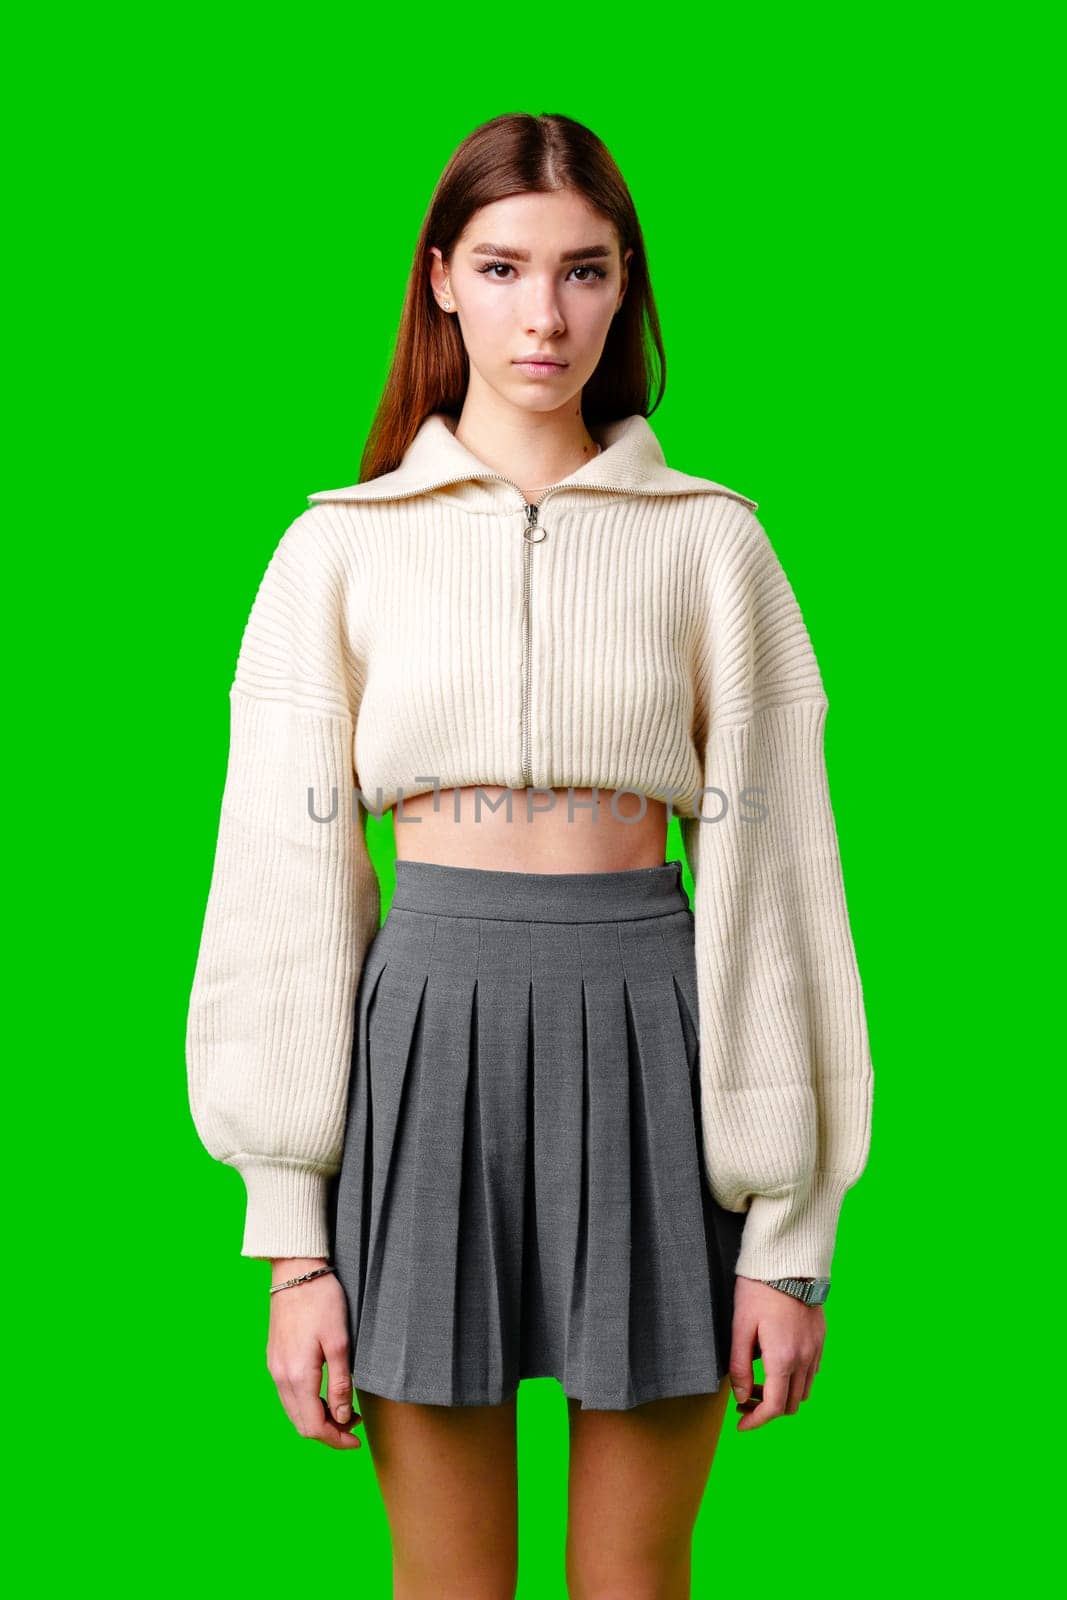 Woman in White Sweater and Gray Skirt